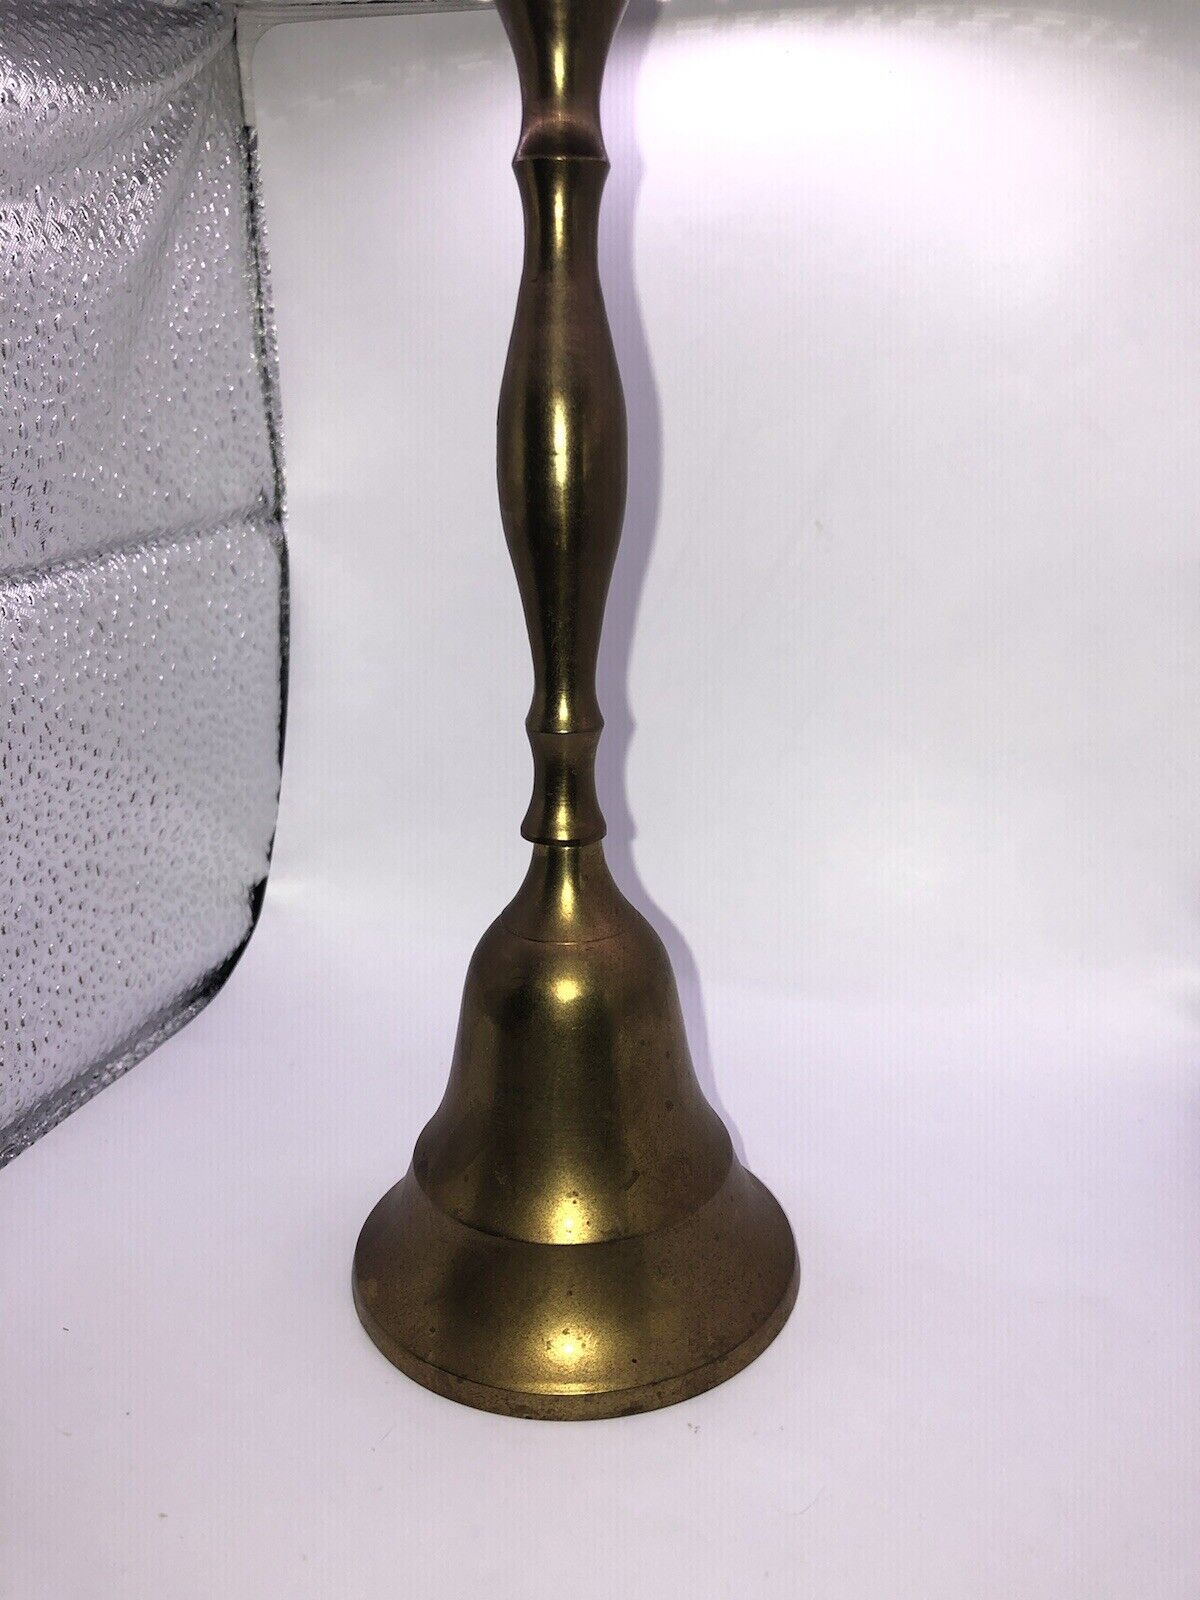 Vintage Solid Brass Long Stem Dinner Bell Antique Style  11-12”Antique Style EUC